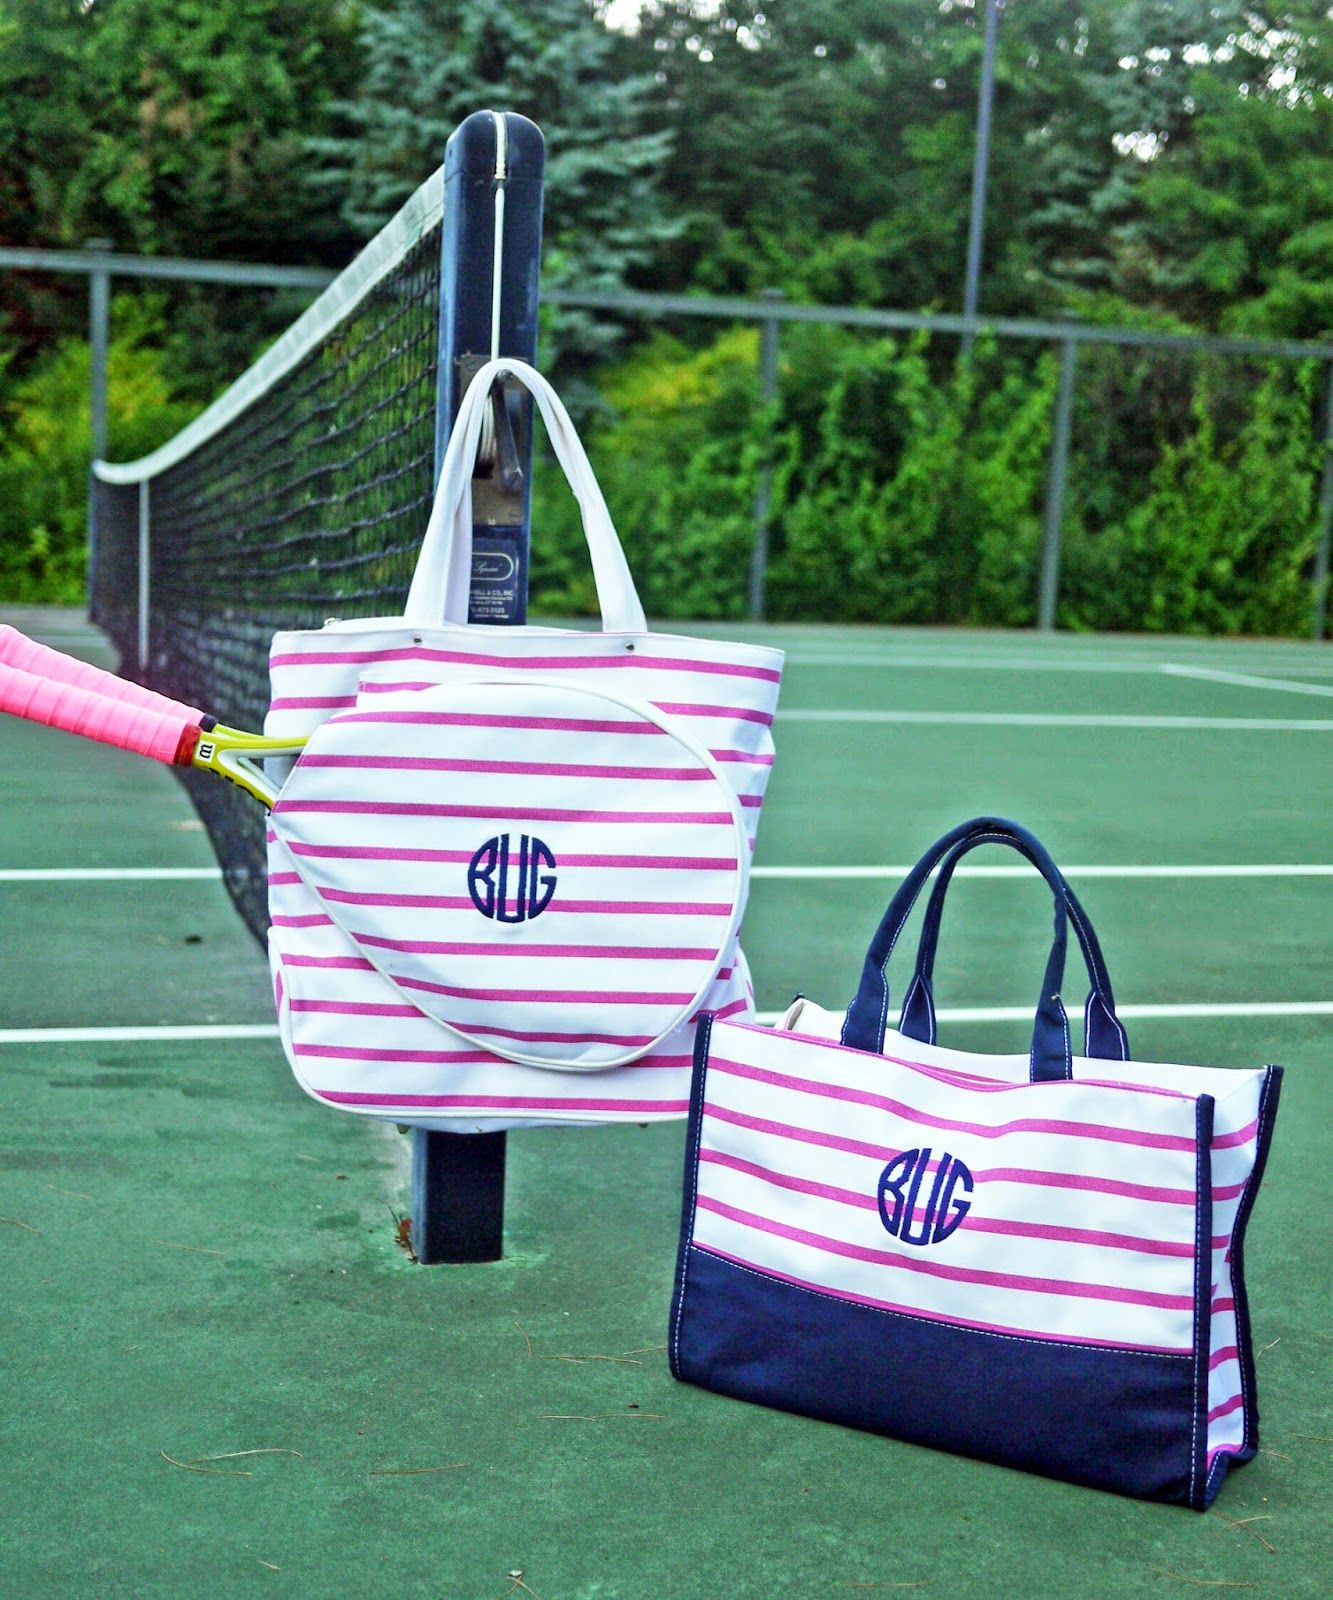 Back in Stock: Monogram Tennis Bags! - The Buggy Blog